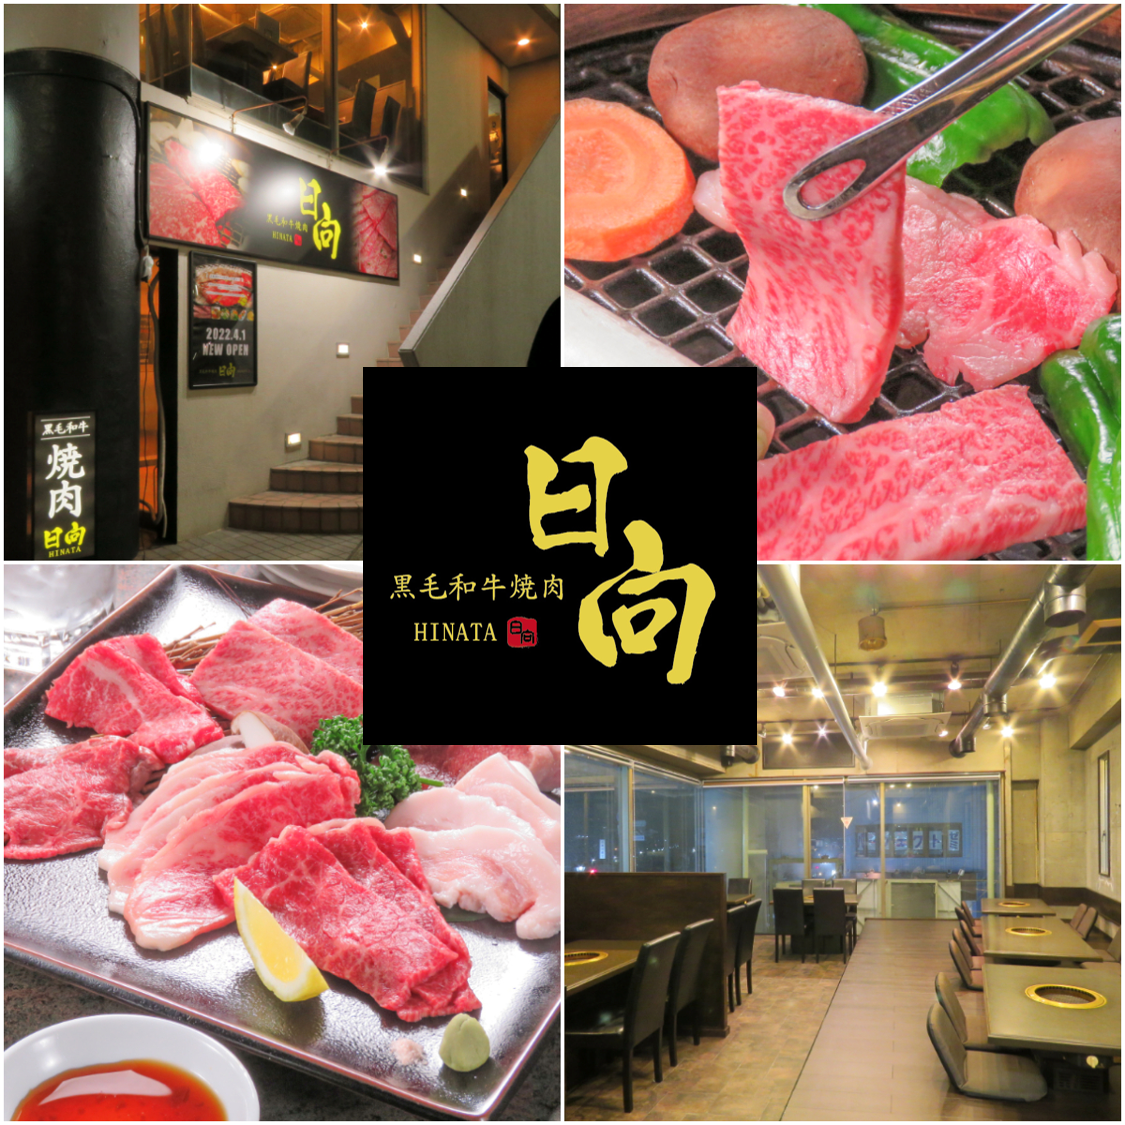 Please enjoy carefully selected Wagyu beef grown in the blessed land in a calm atmosphere.